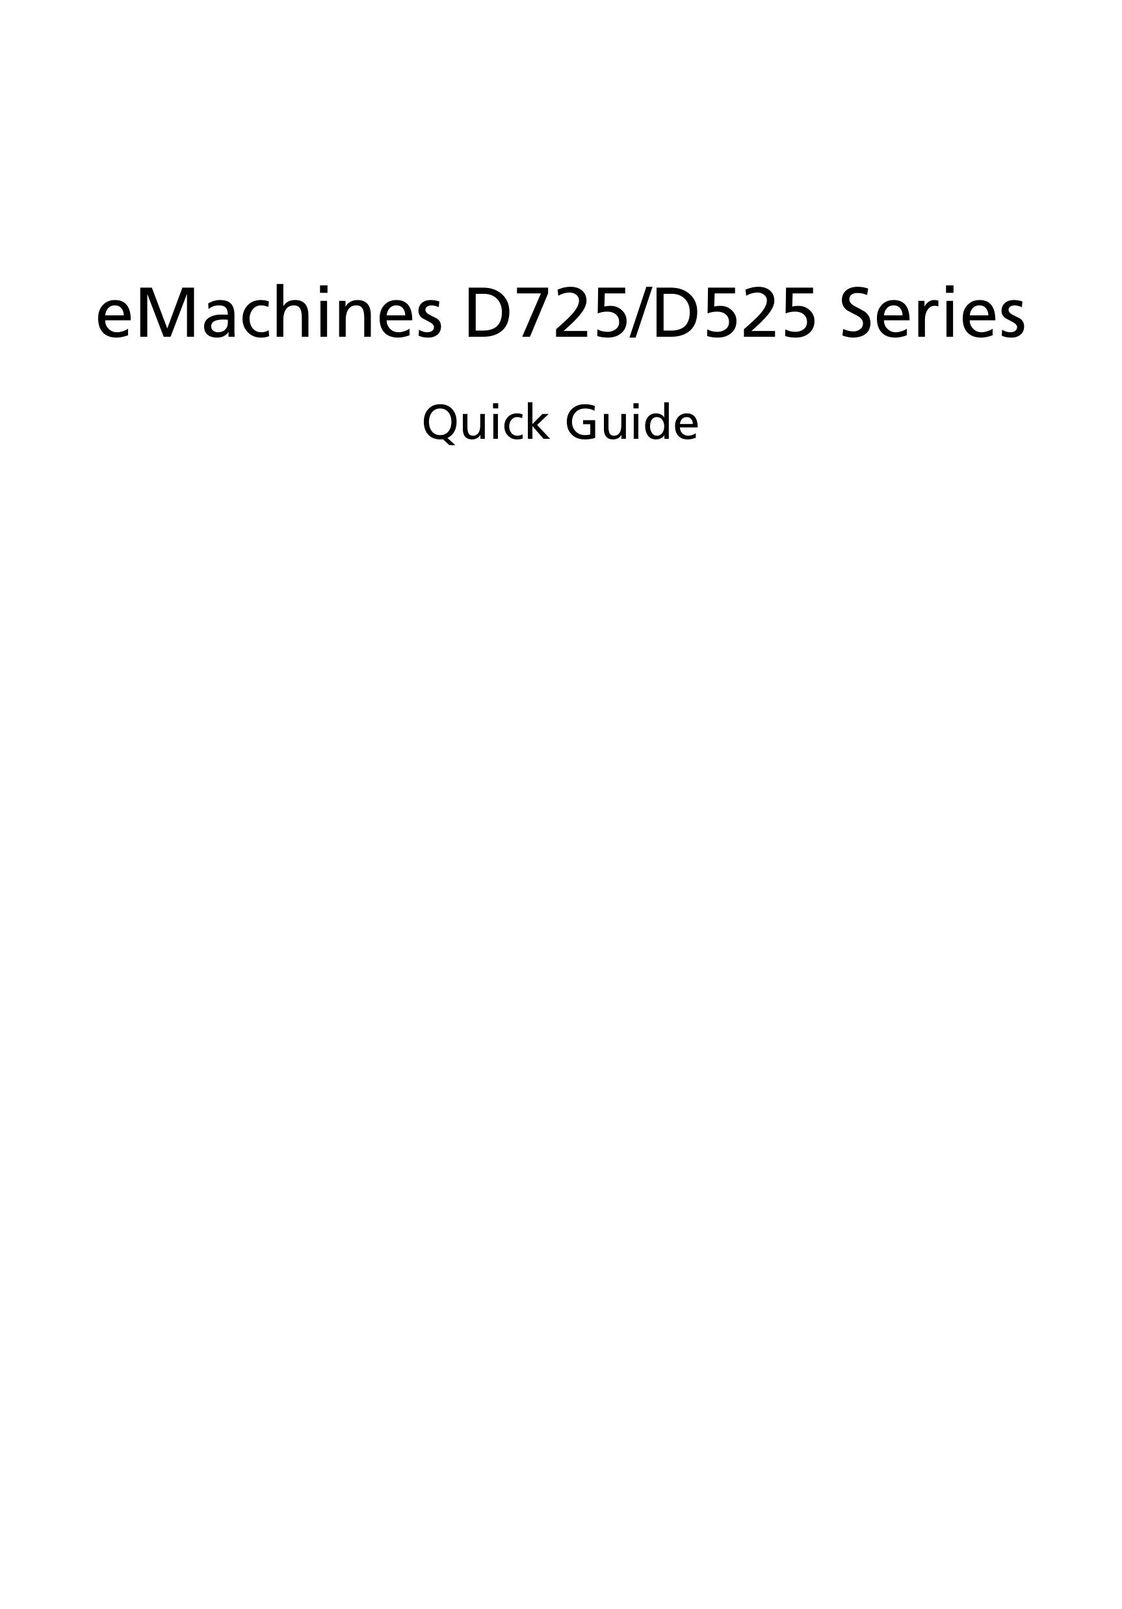 eMachines E725 Laptop User Manual